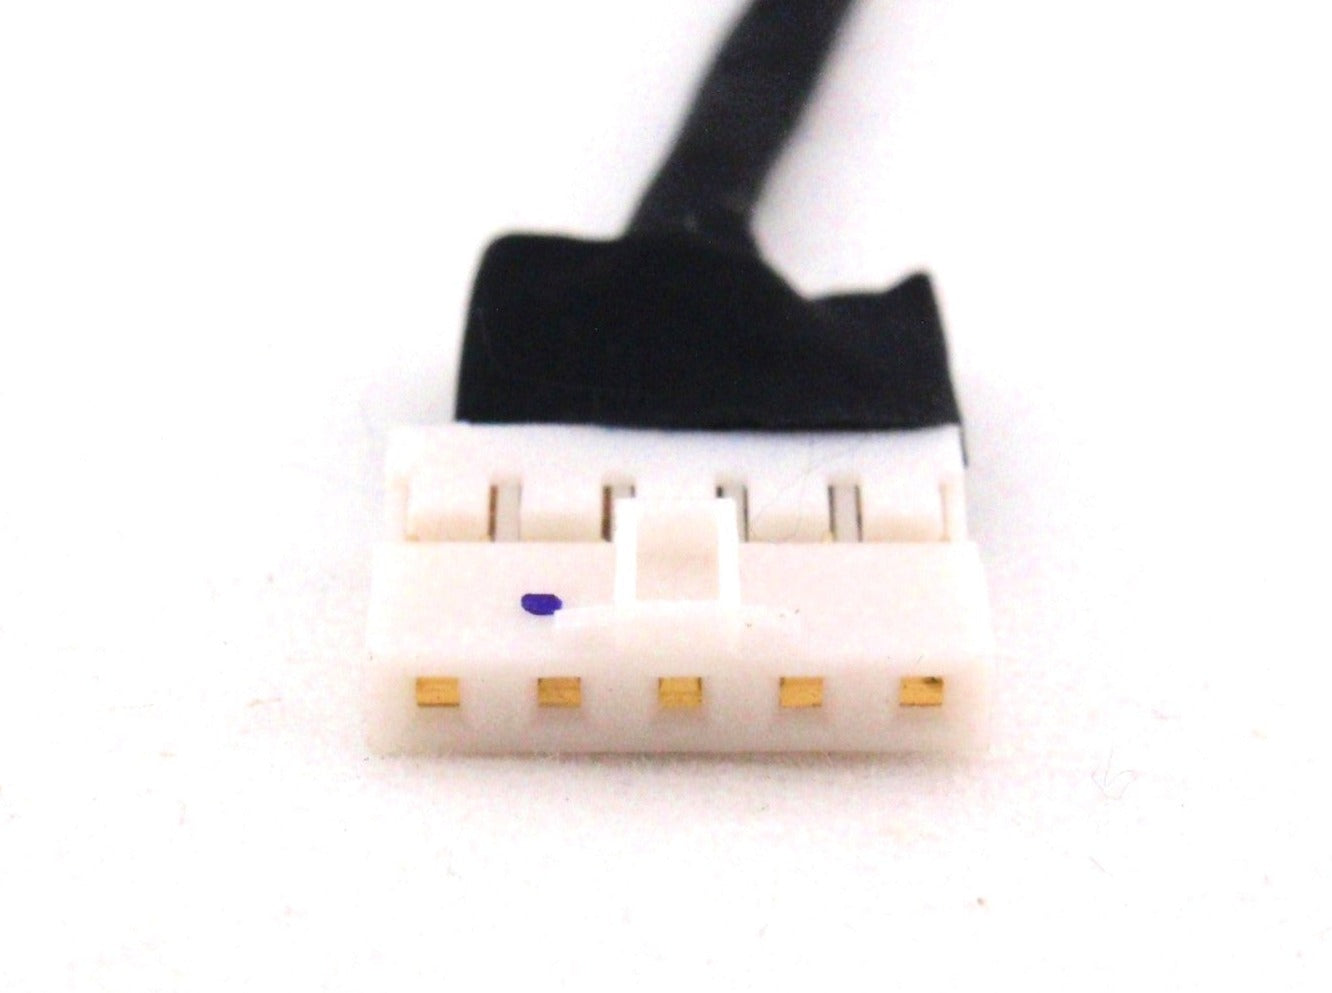 Lenovo New DC In Power Jack Charging Port Connector Cable M51-35 M51-80 450.03N01.0001 450.03N01.0011